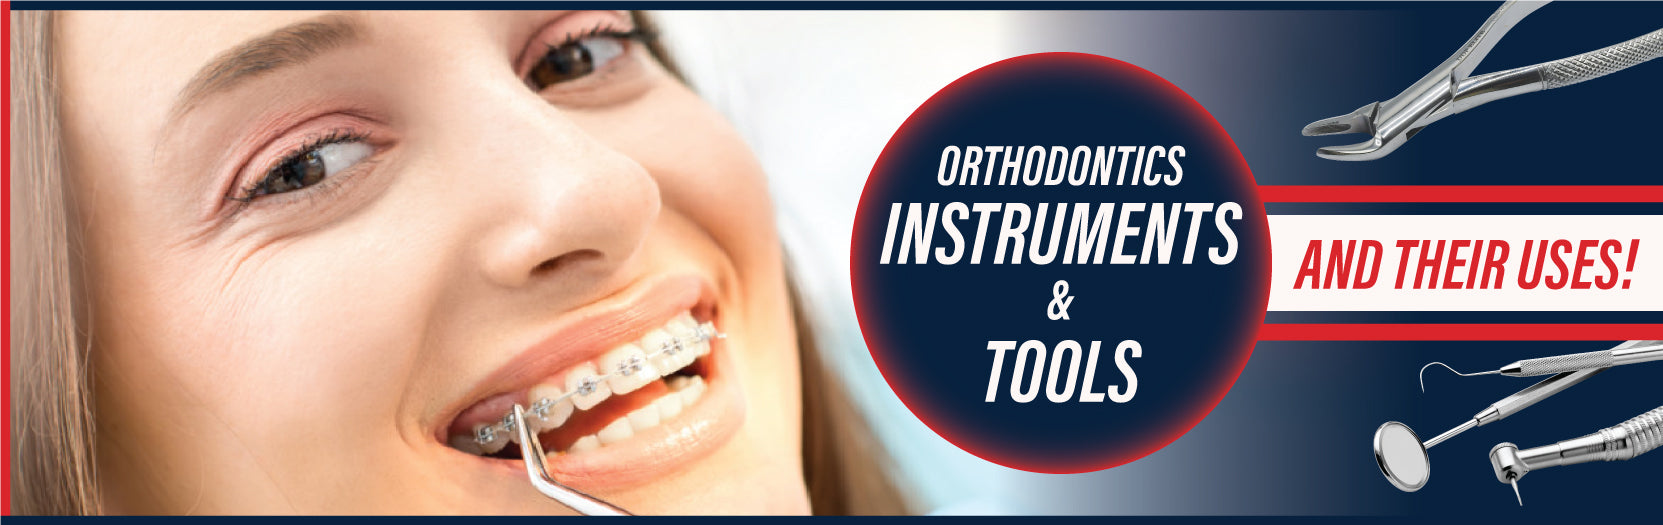 Orthodontic instruments and Tools and their uses - ddpeliteusa